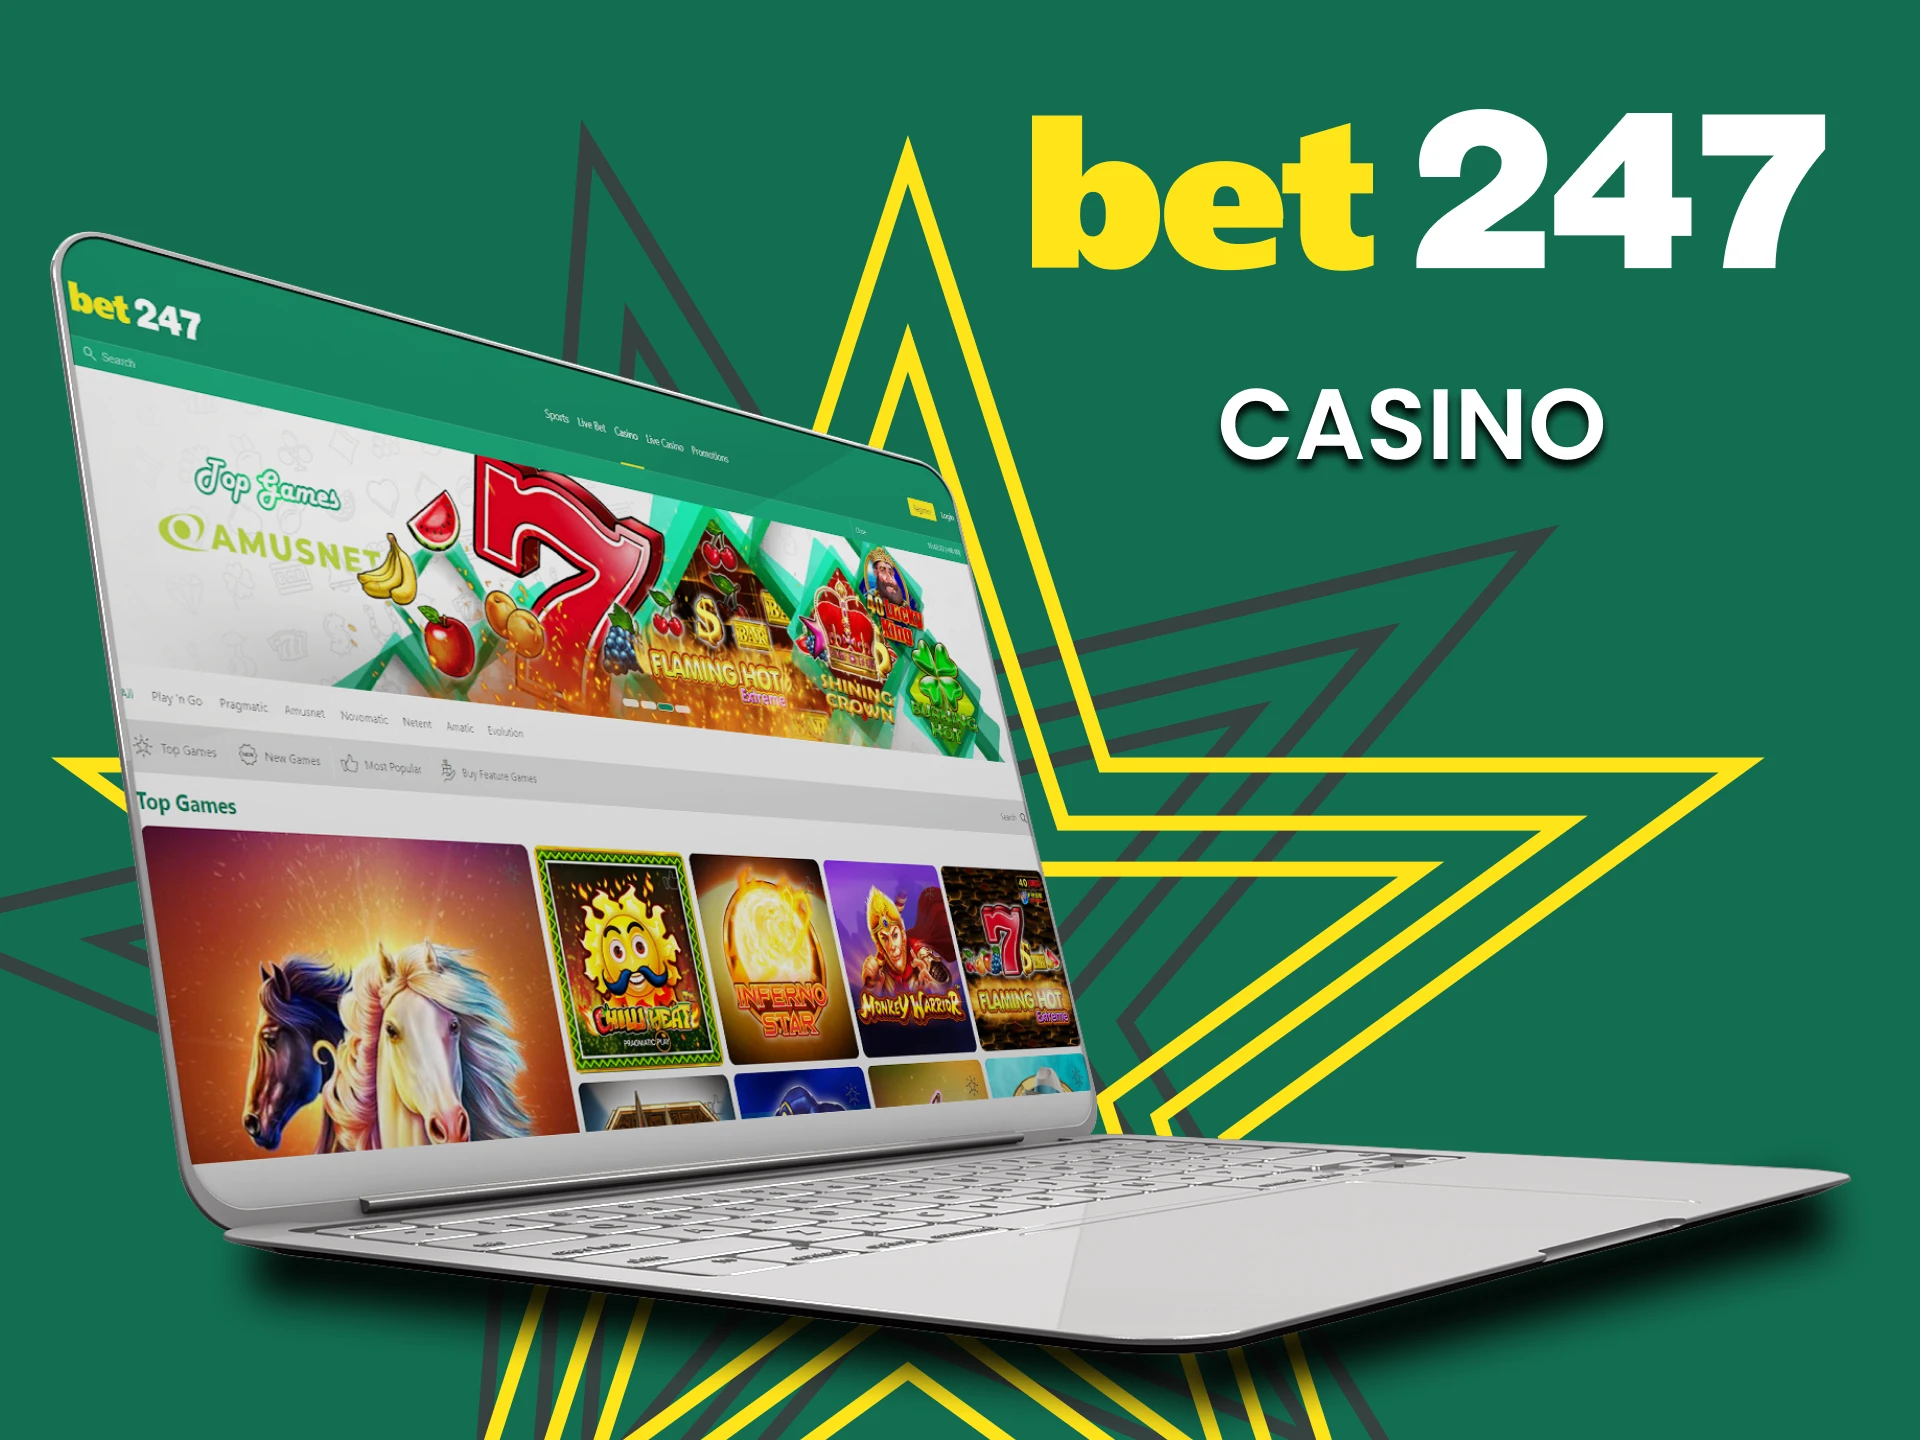 Play at the casino with Bet247.